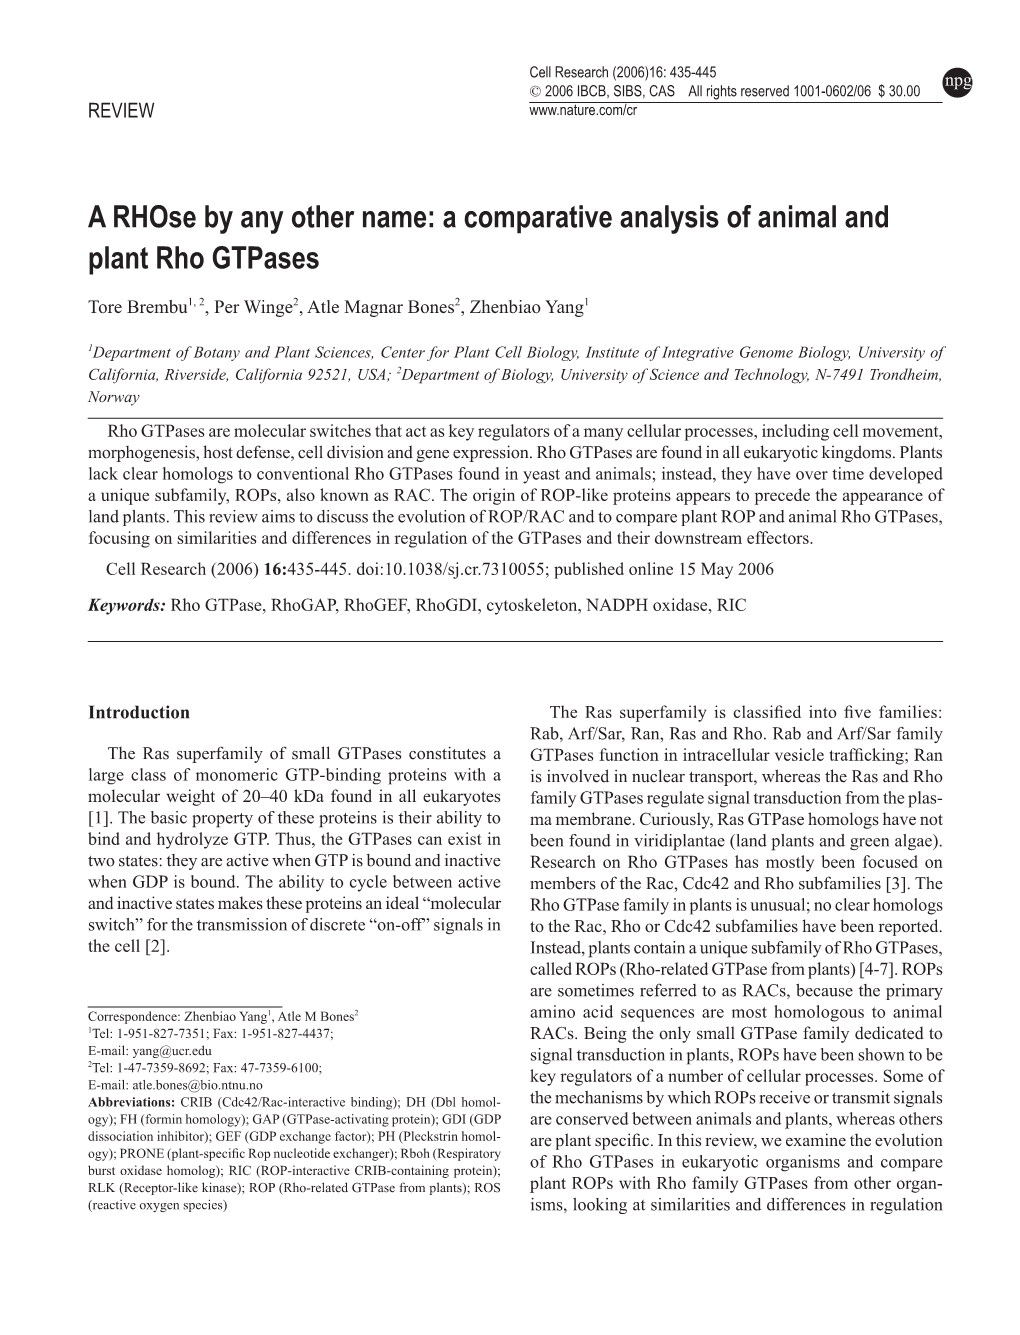 A Comparative Analysis of Animal and Plant Rho Gtpases